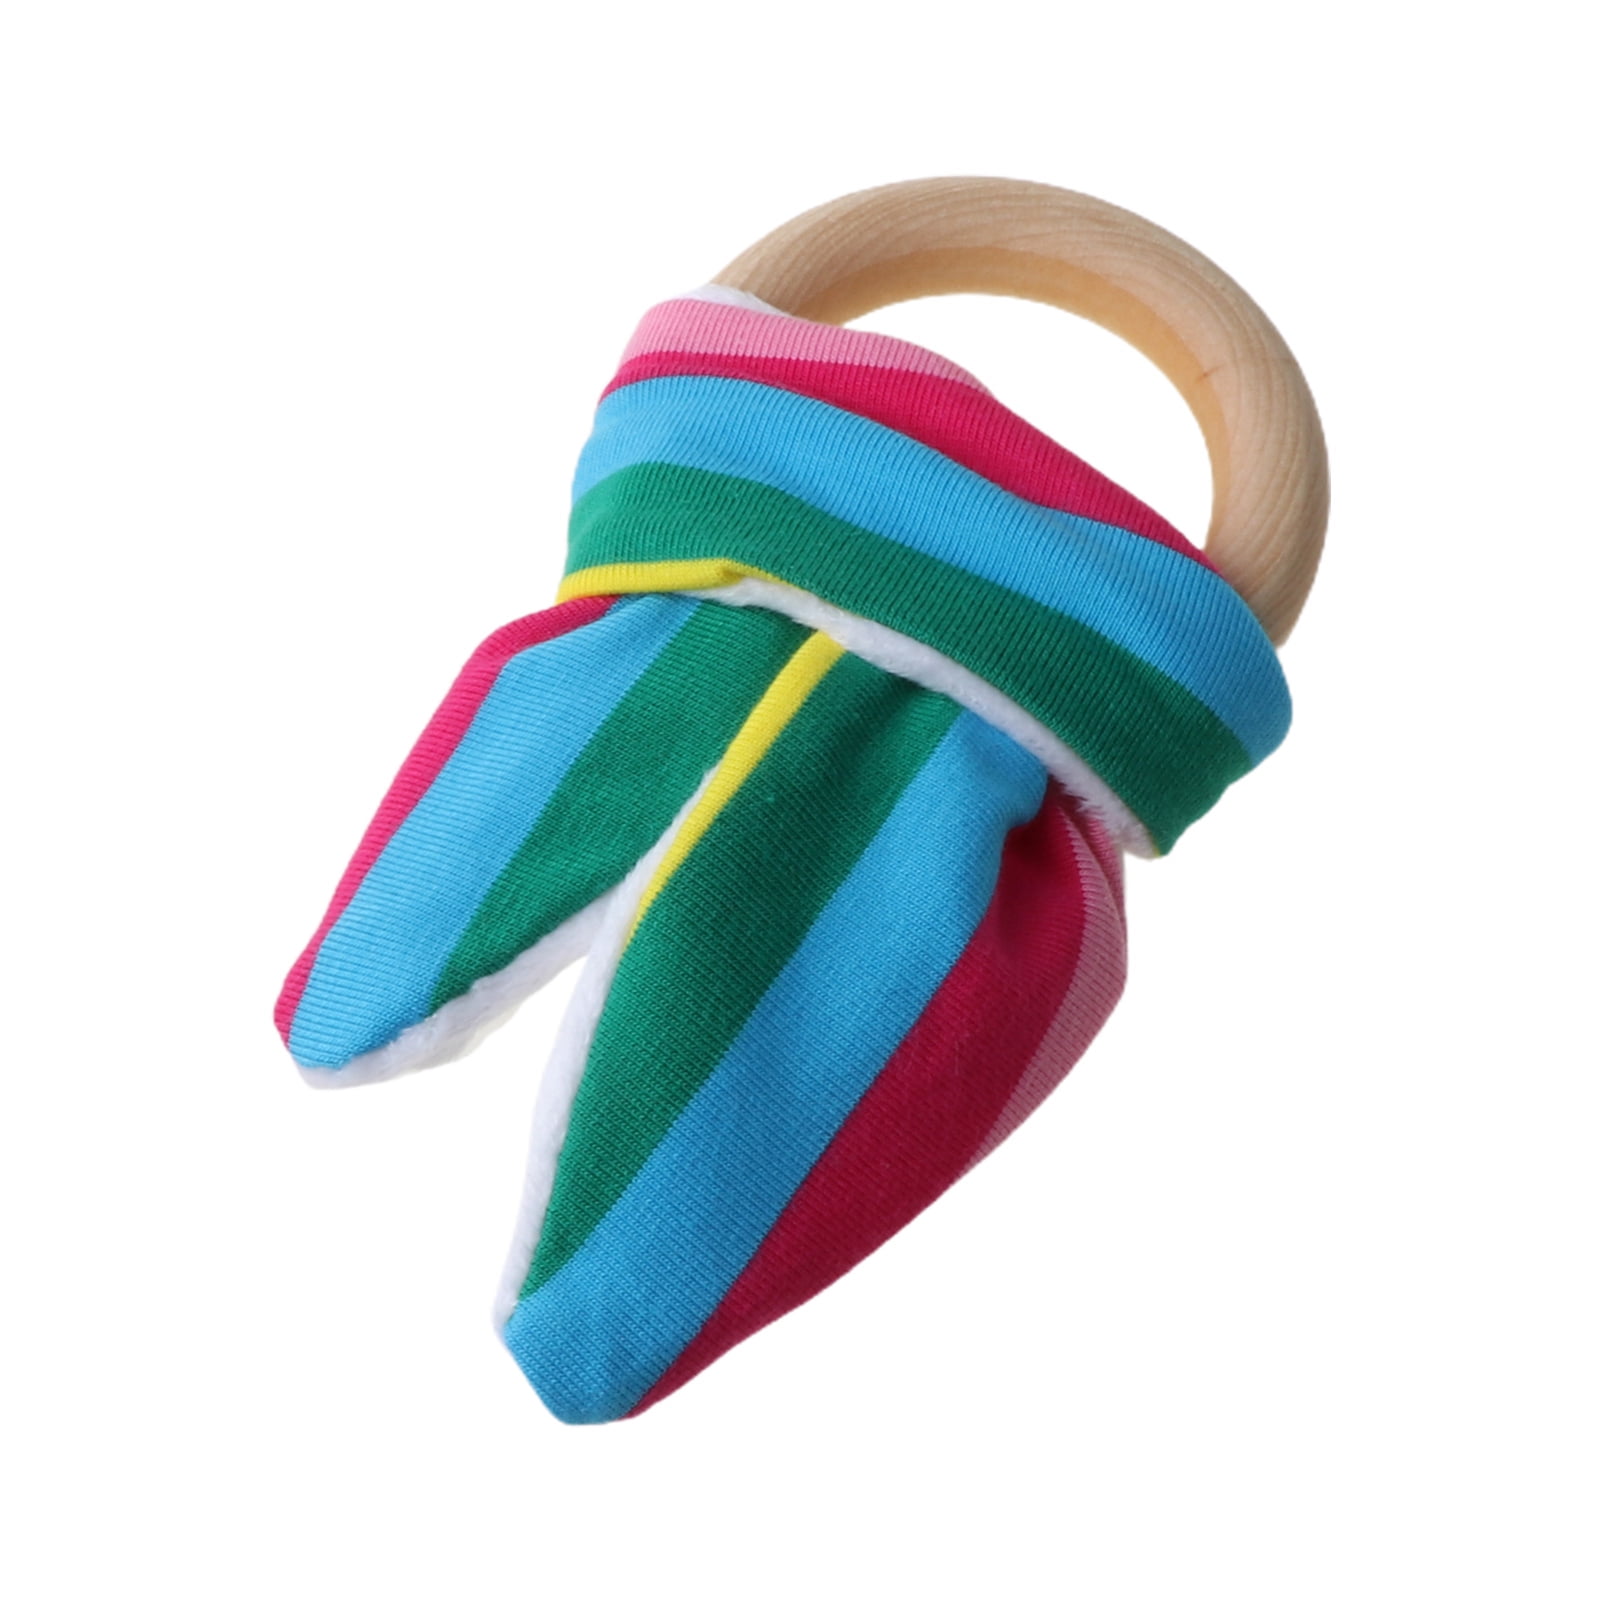 Hot Wooden Natural Baby Teething Ring Chewie Teether Bunny Sensory Gift Toy